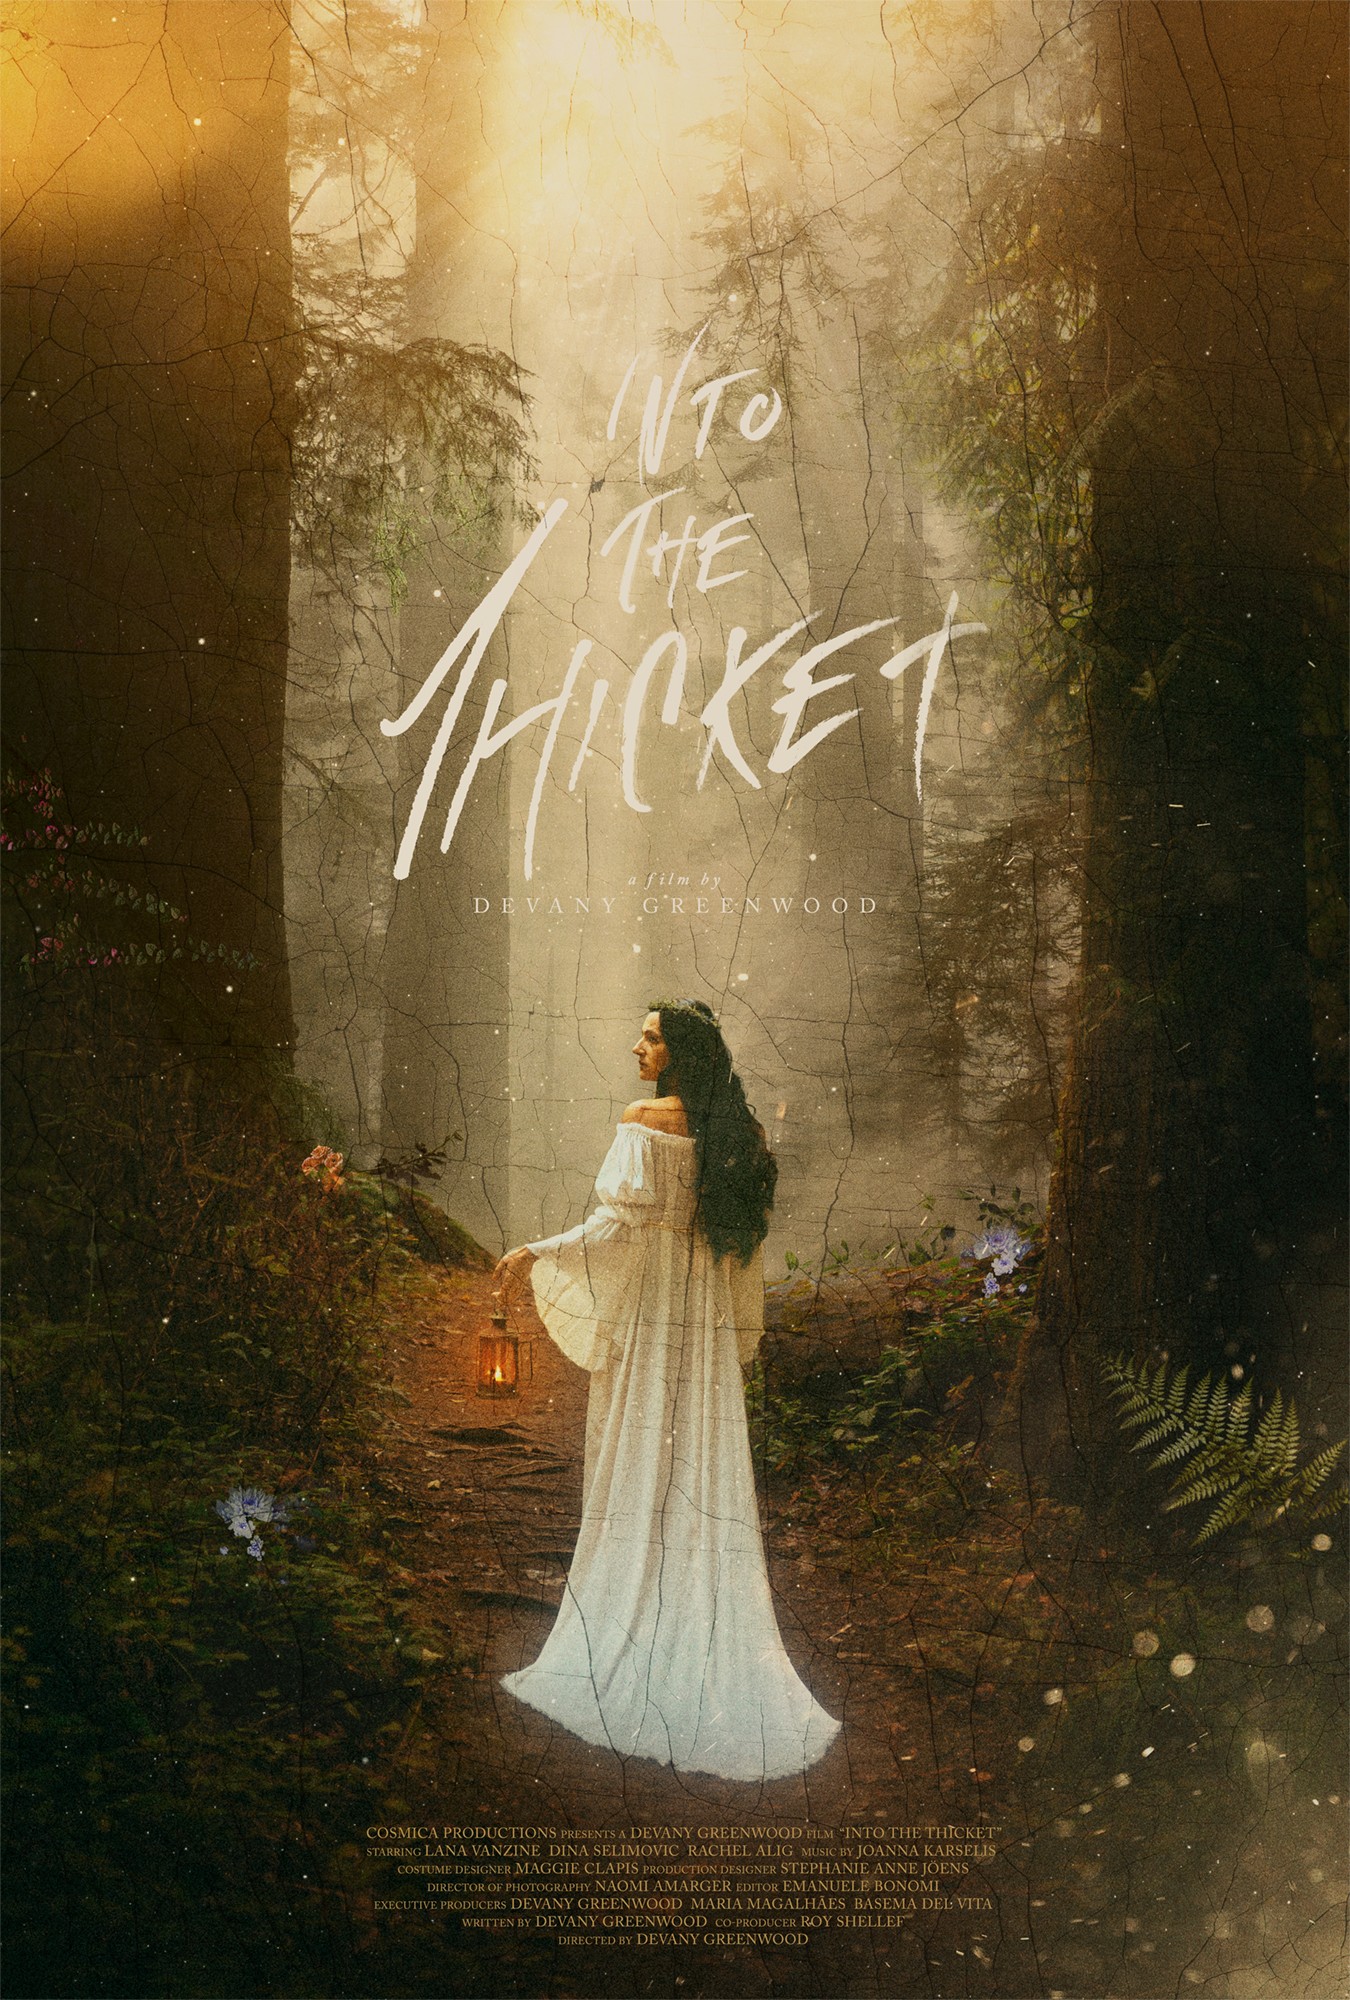 Mega Sized Movie Poster Image for Into the Thicket